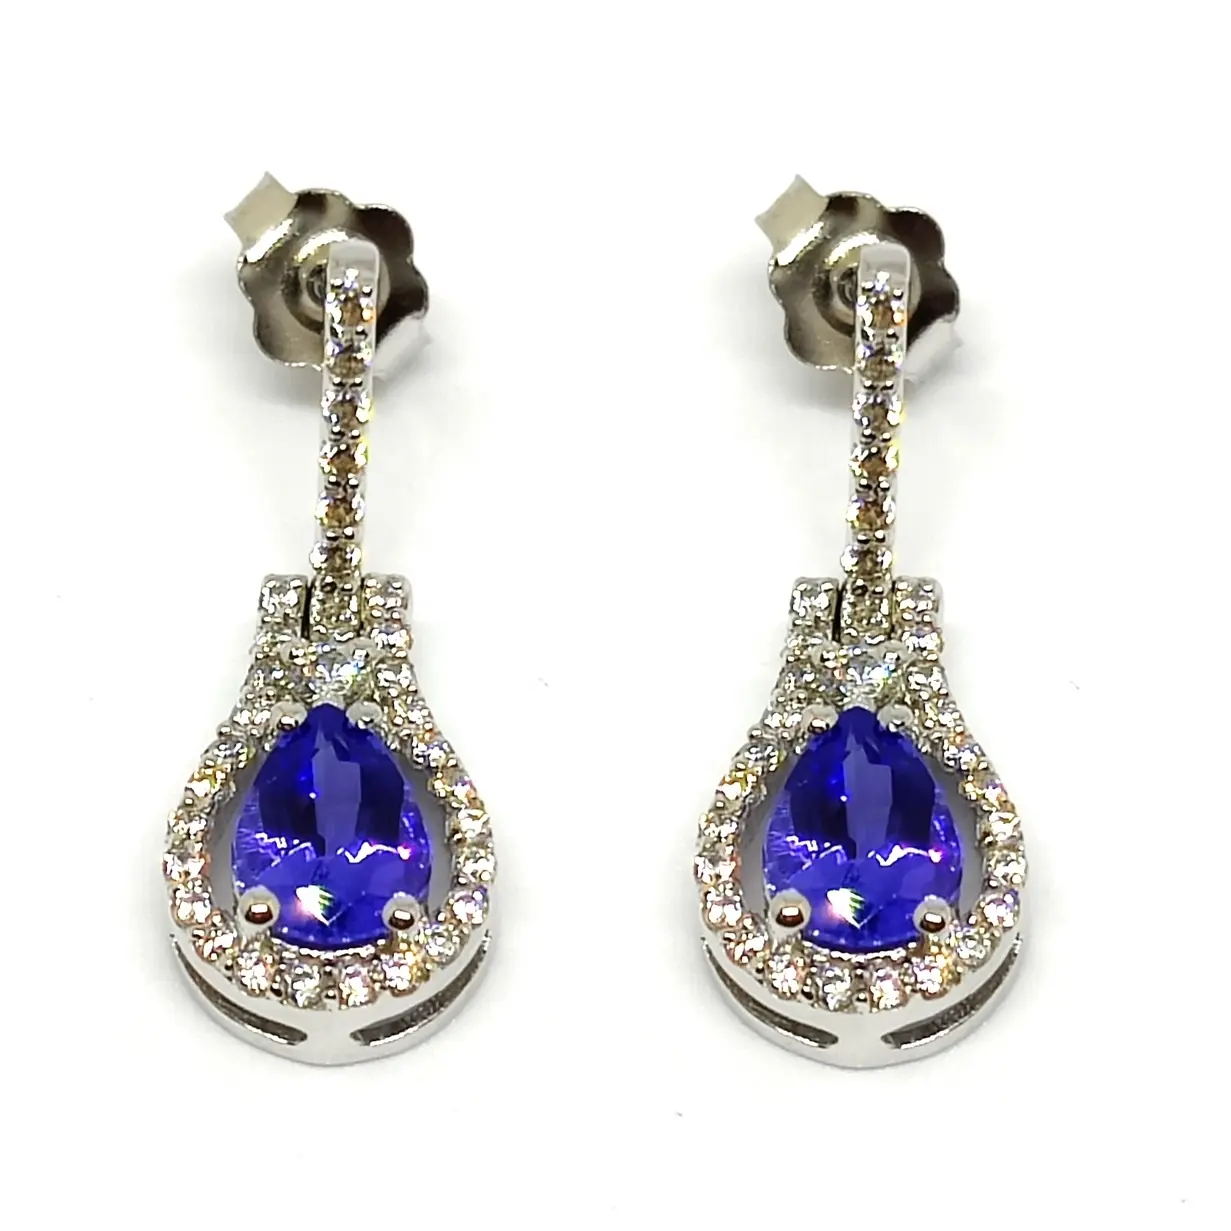 Handmade Silver earrings pendant set Design 925 Silver Earrings Design with best quality colored Tanzanite CZ for Working Women